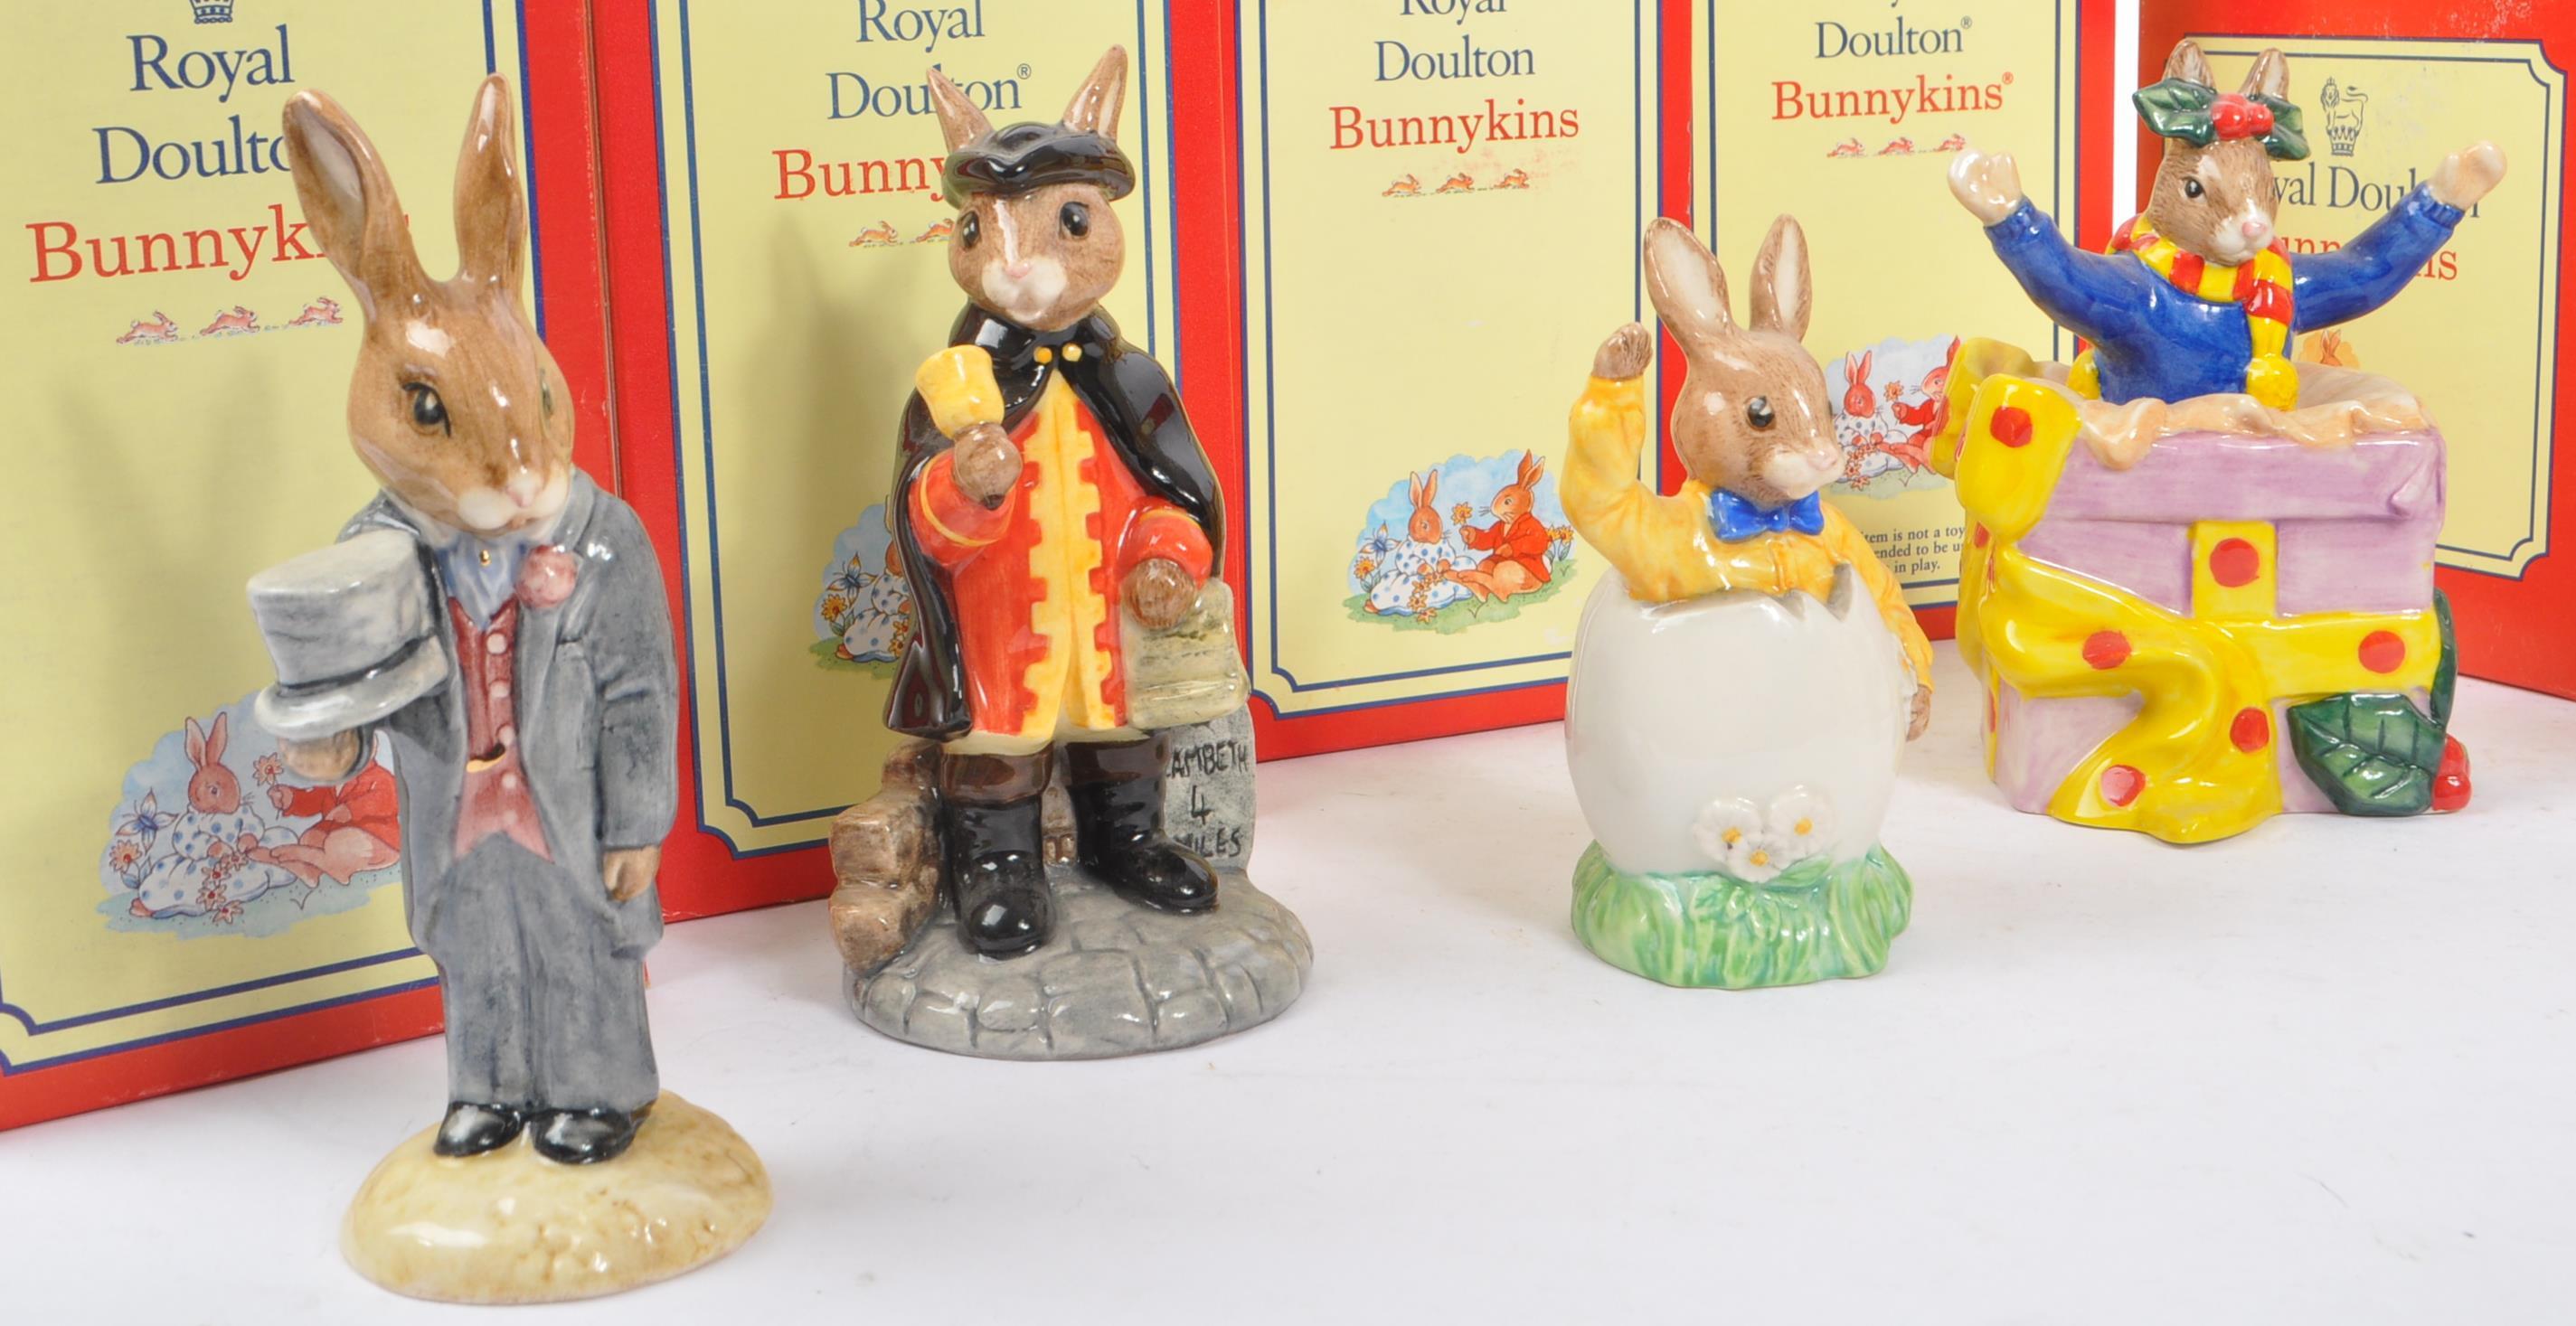 ROYAL DOULTON - BUNNYKINS - COLLECTION OF PORCELAIN FIGURES - Image 2 of 9